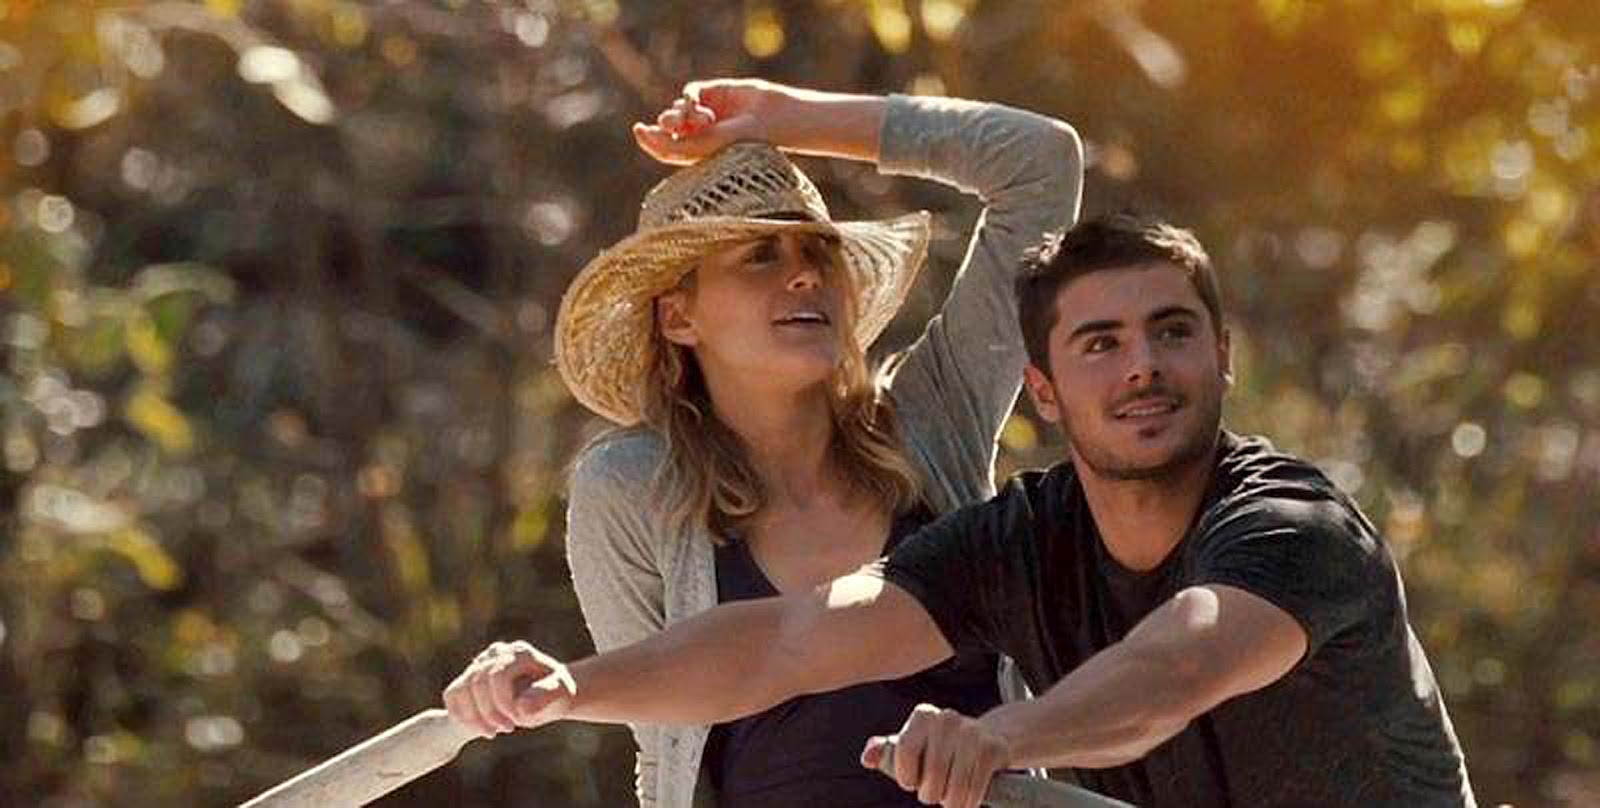 THE LUCKY ONE' Movie by ZAC EFRON and TAYLOR SCHILLING